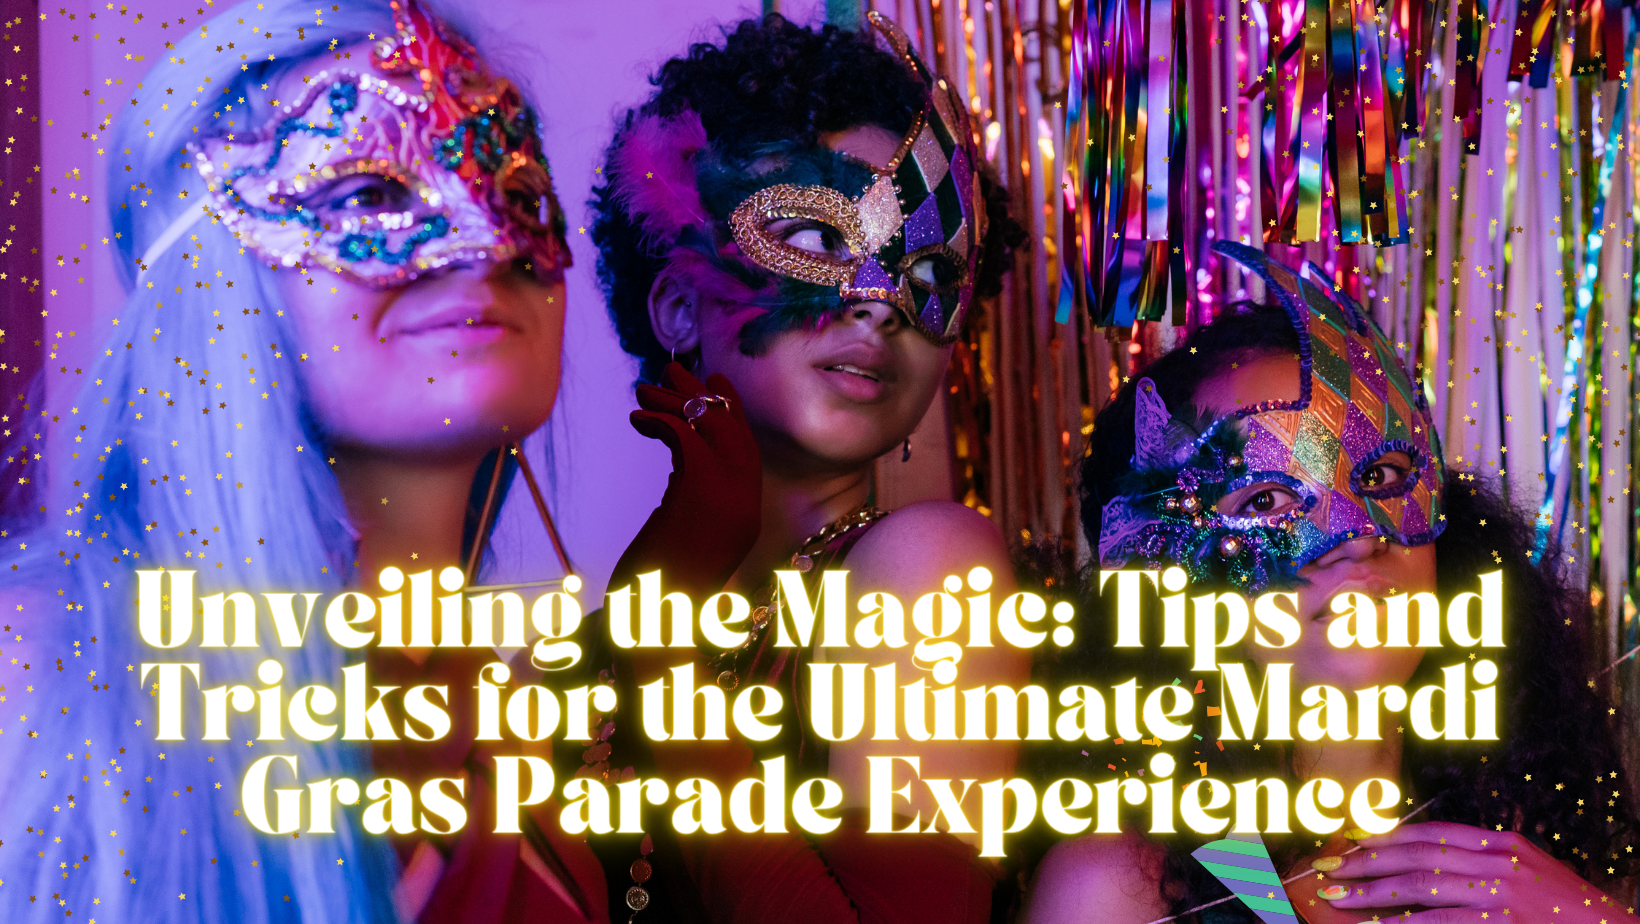 Unveiling the Magic: Tips and Tricks for the Ultimate Mardi Gras Parade Experience